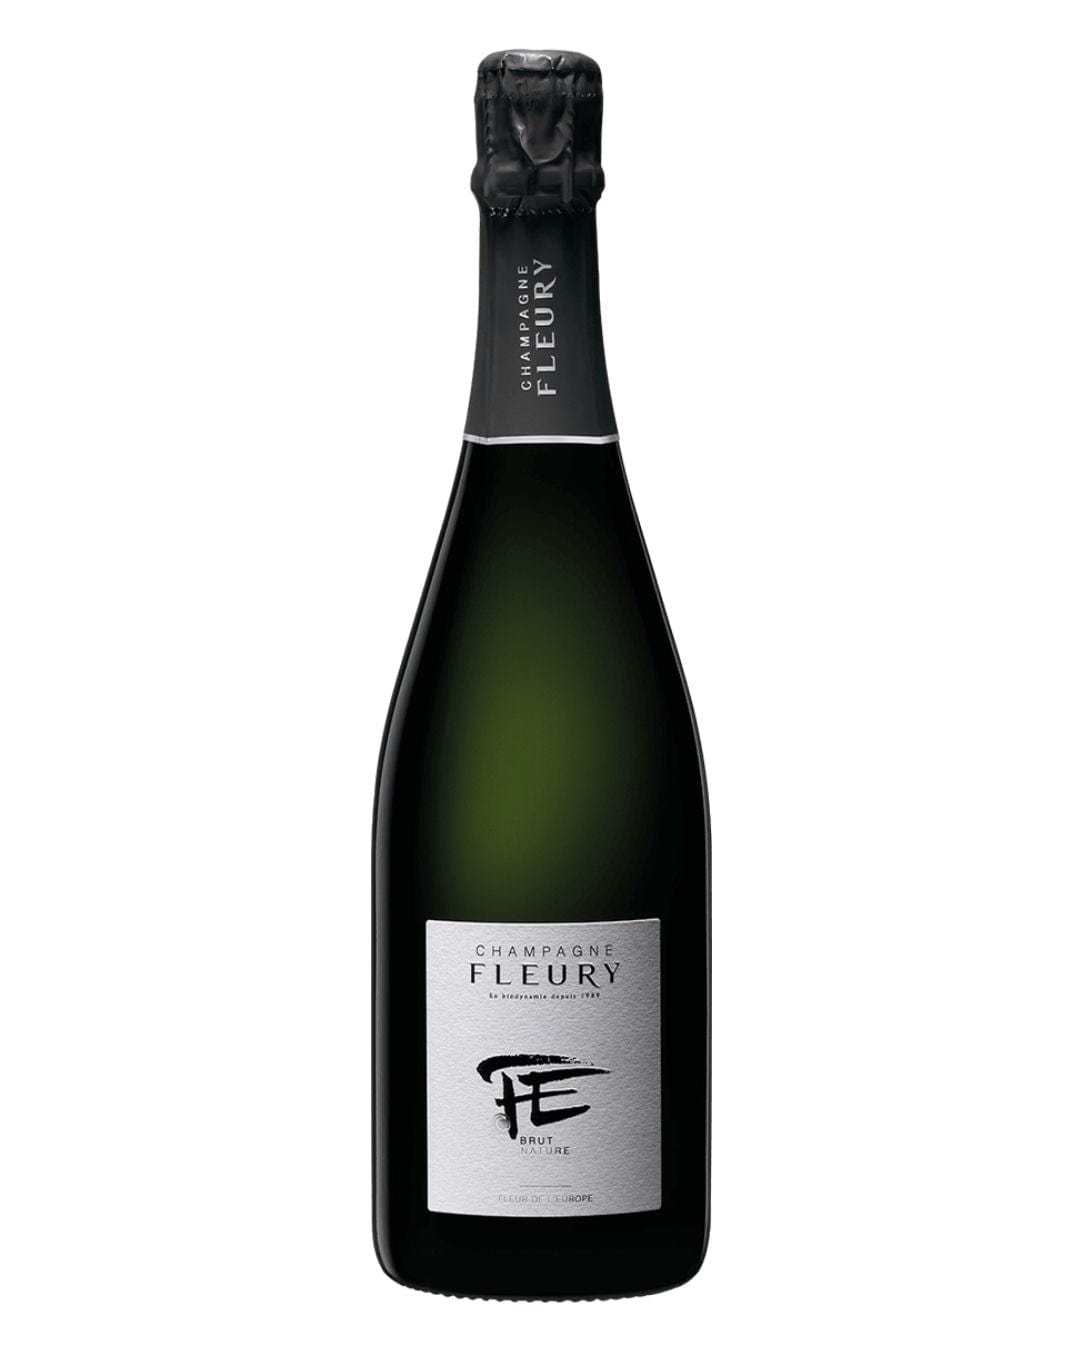 Shop Champagne Fleury Champagne Fleury Fleur de l'Europe Brut Nature NV online at PENTICTON artisanal French wine store in Hong Kong. Discover other French wines, promotions, workshops and featured offers at pentictonpacific.com 